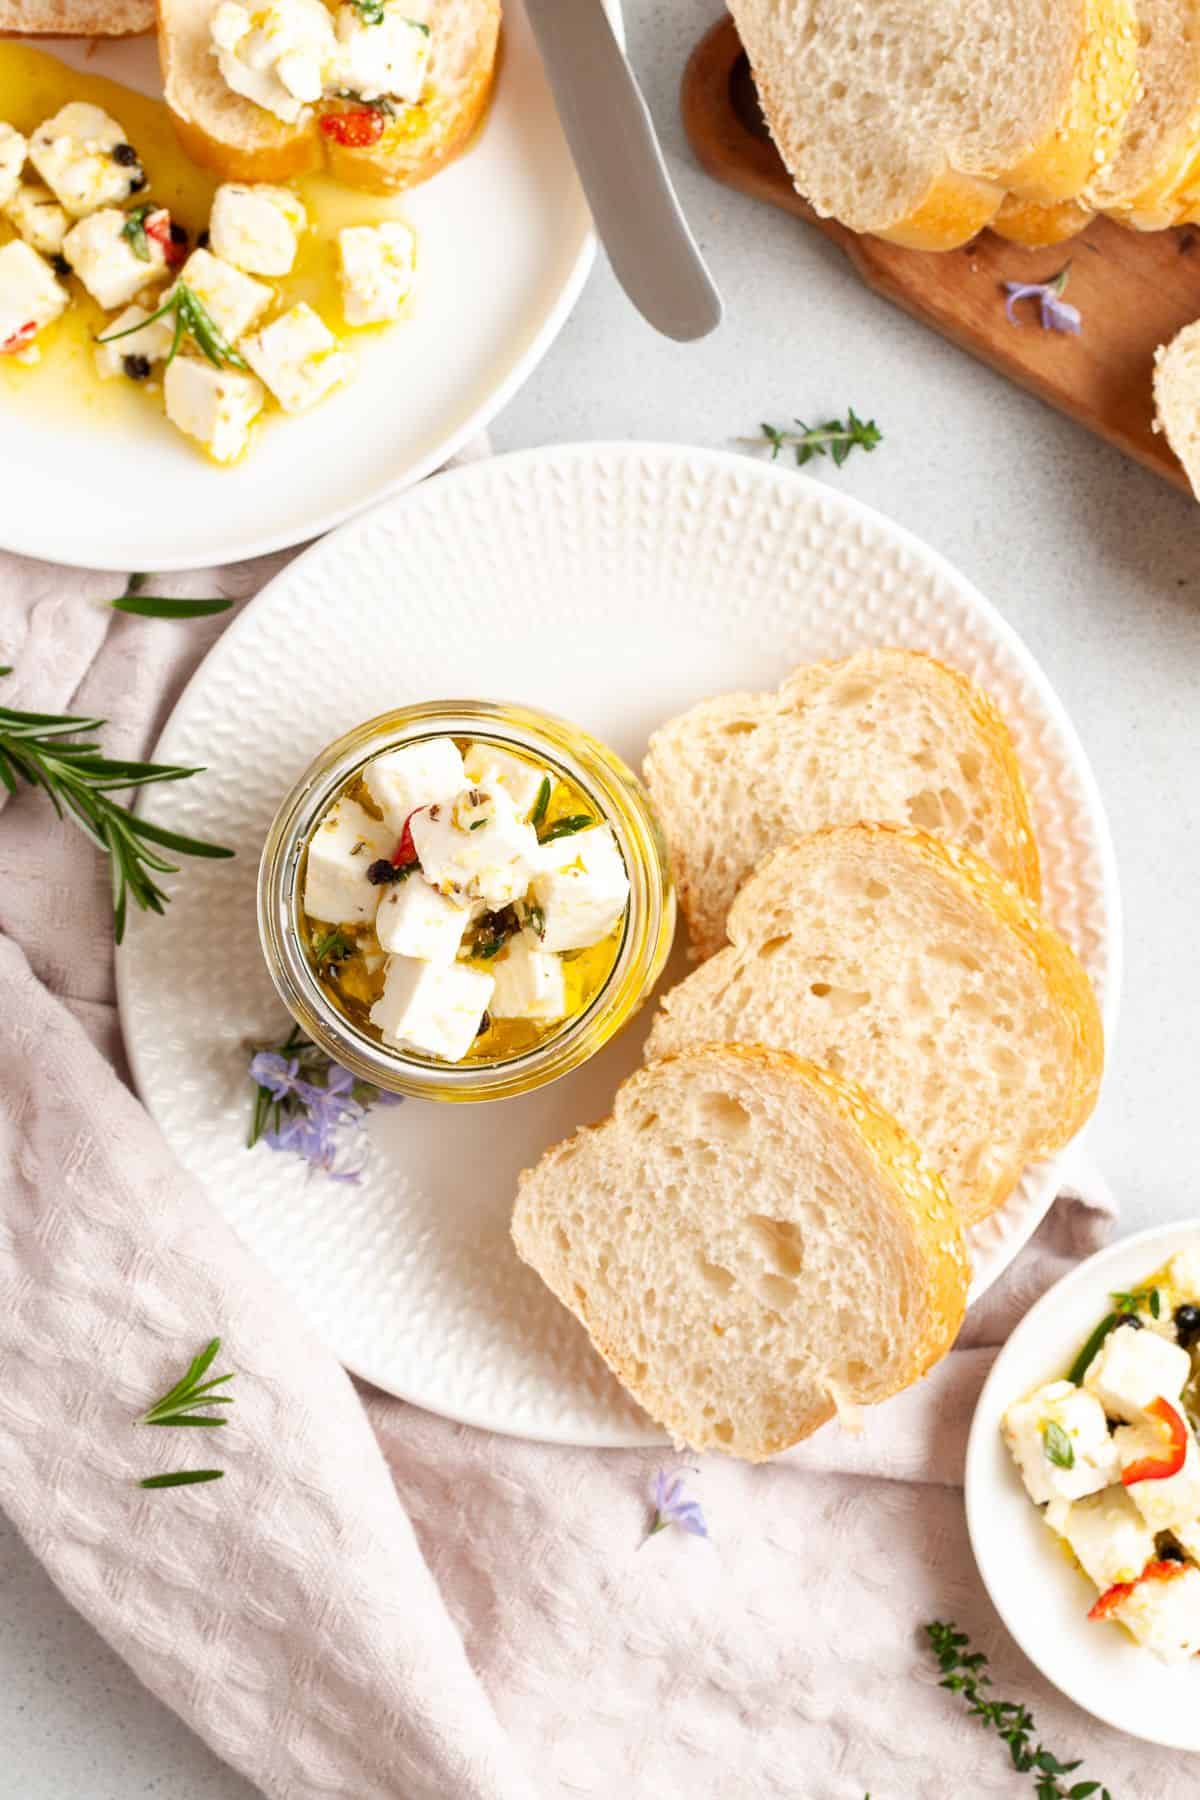 Two white plates with some feta cheese on the plate and some in a jar, and some slices of bread.